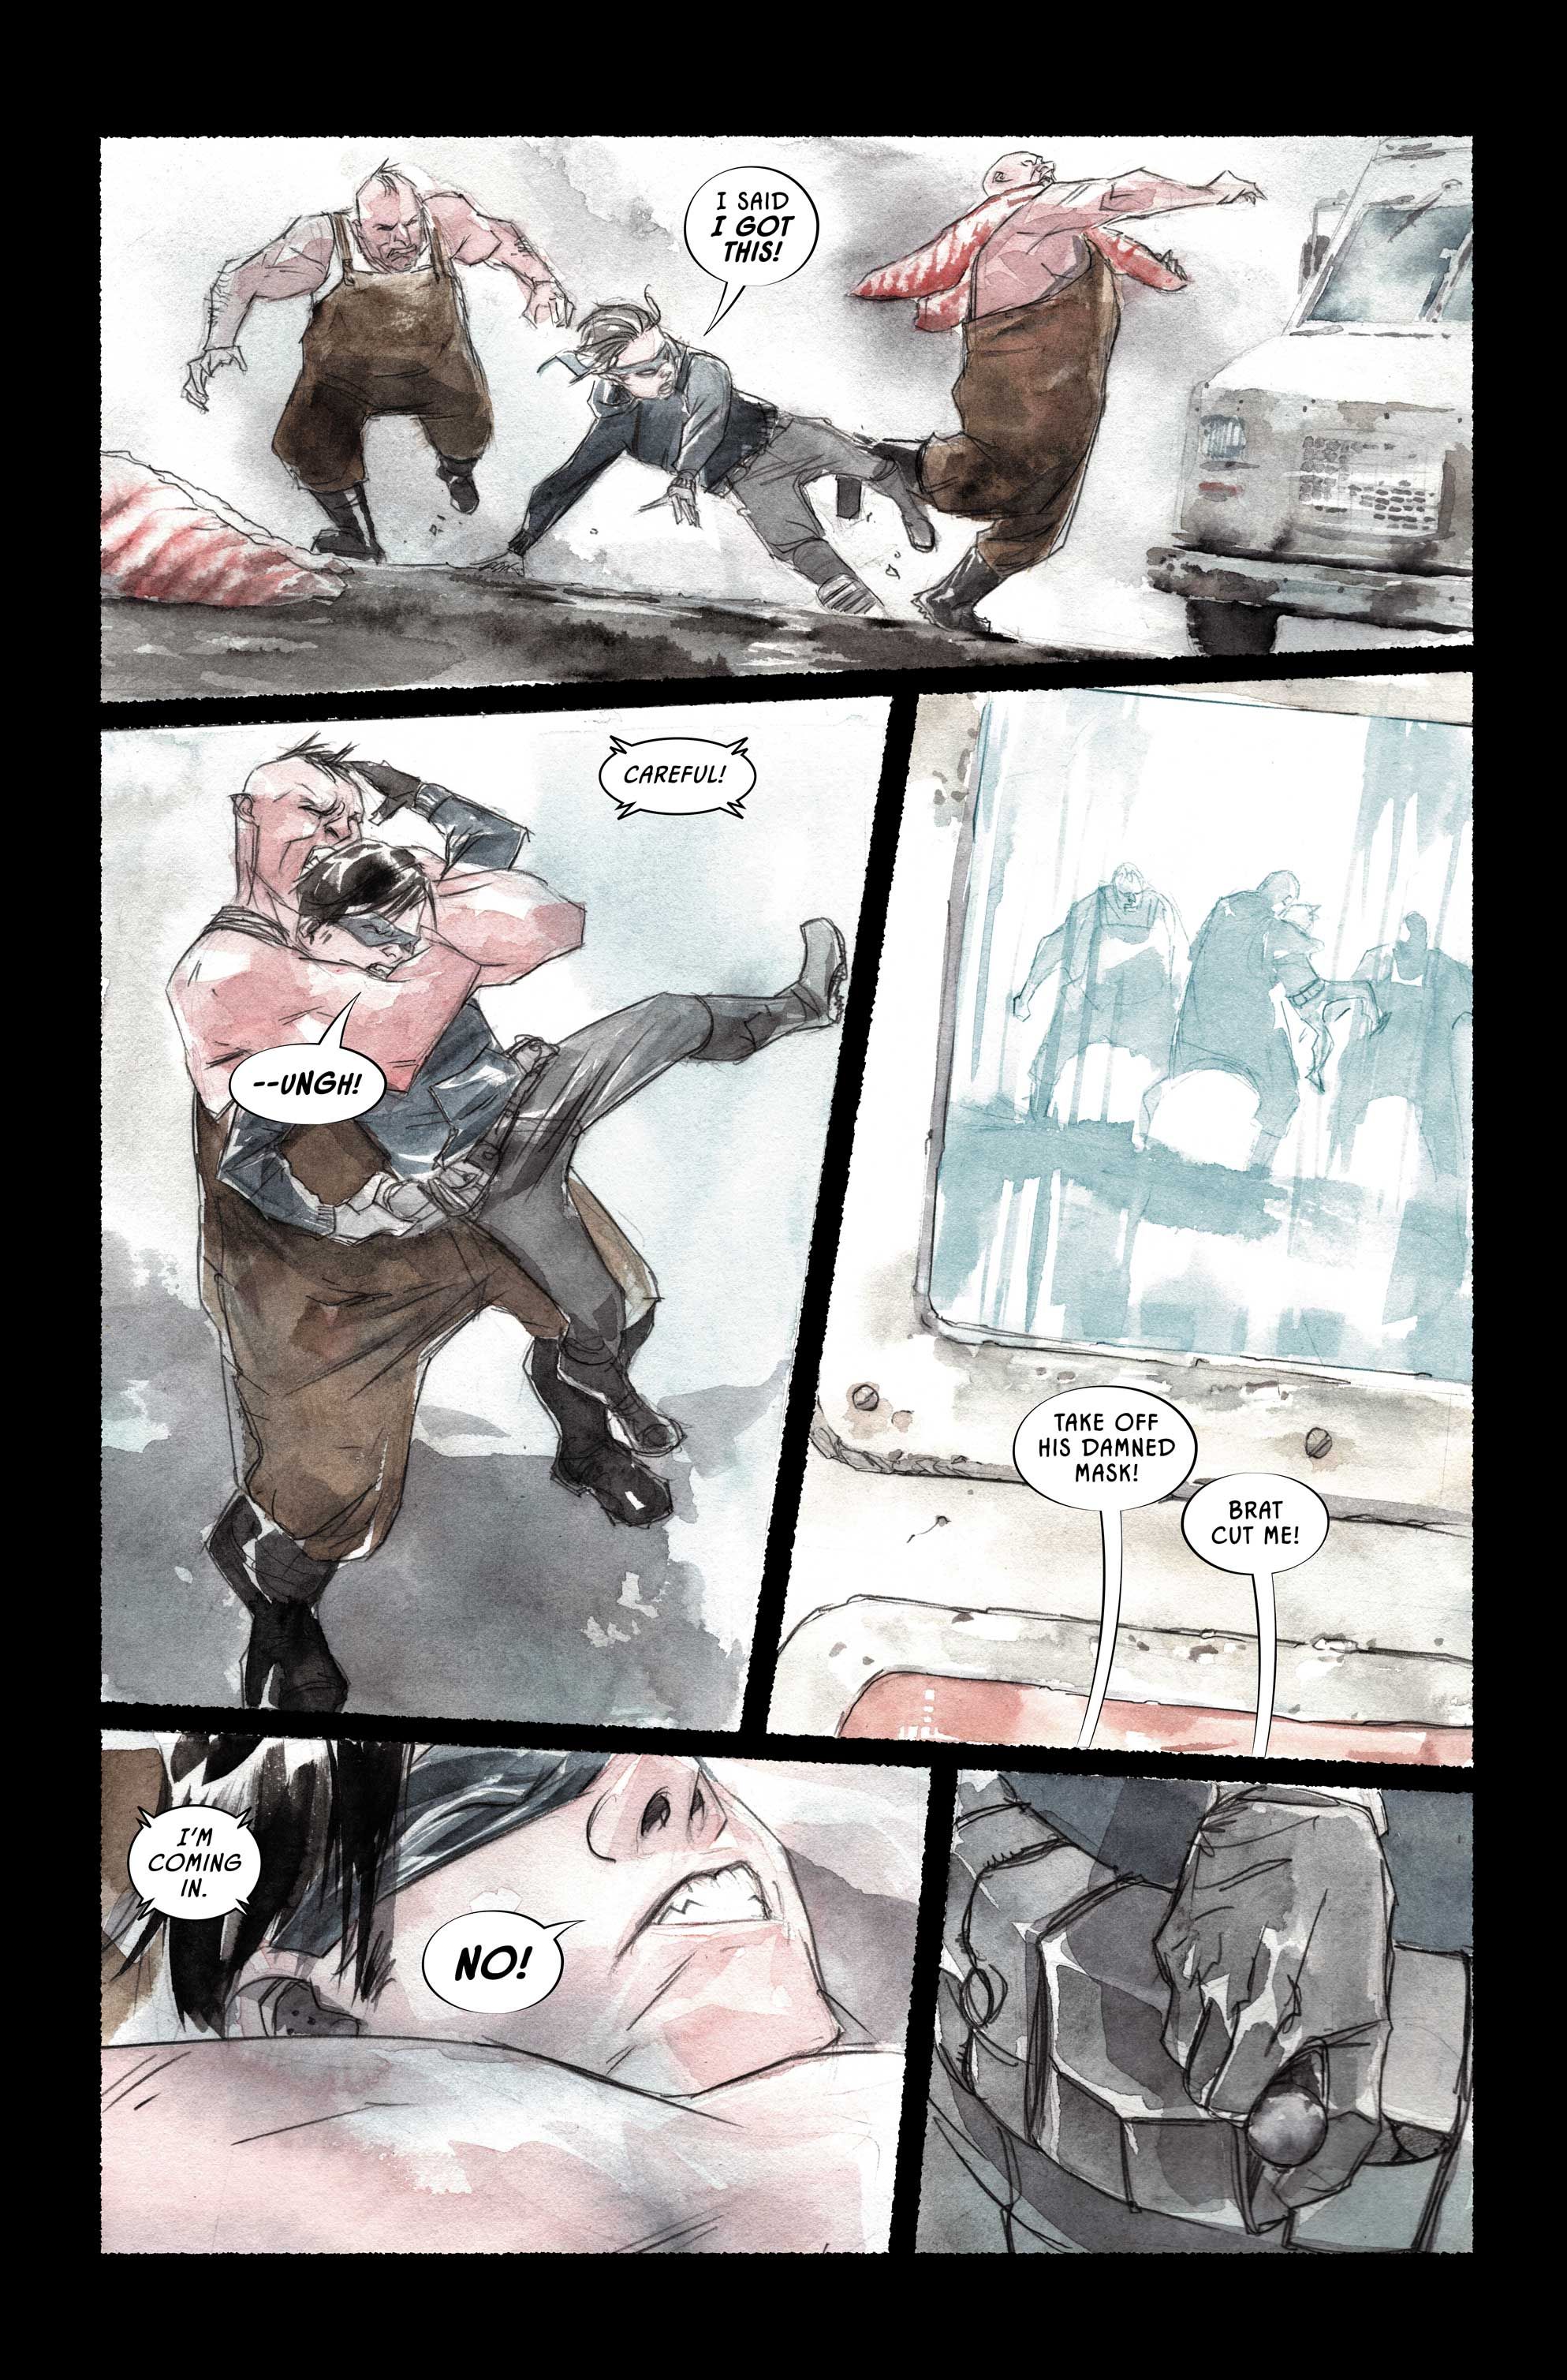 Preview pages for Robin &amp; Batman #1 by Jeff Lemire and Dustin Nguyen